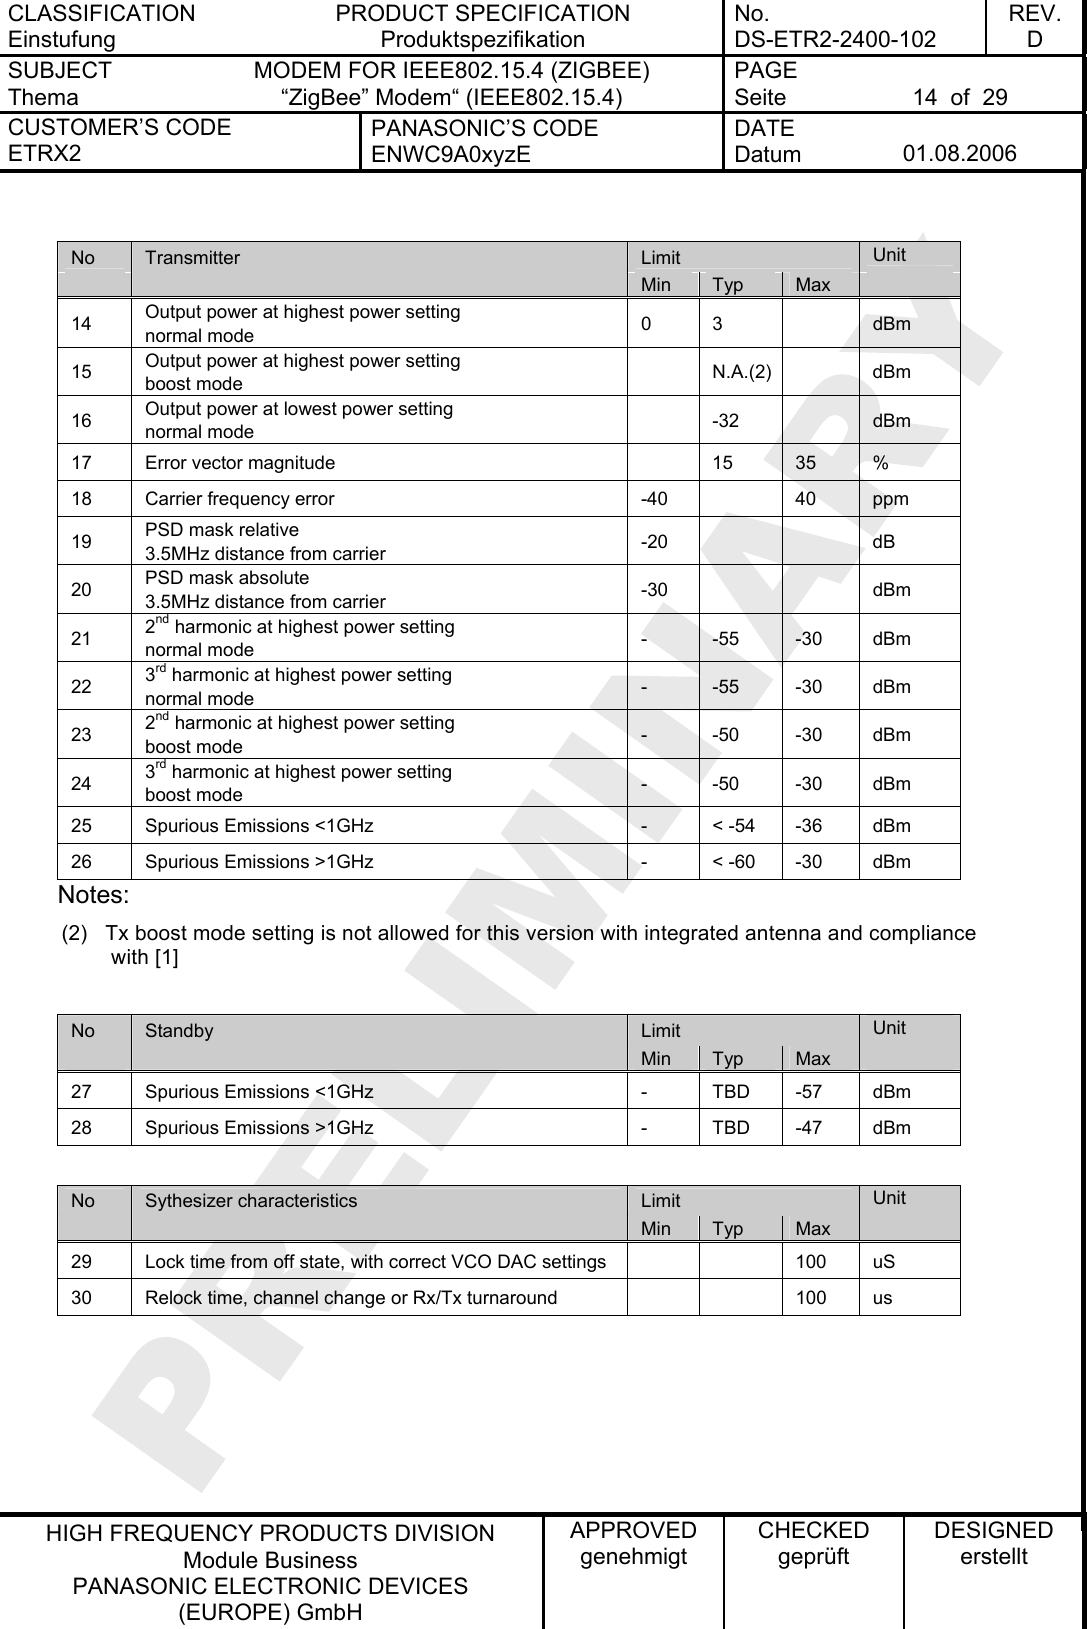 CLASSIFICATION Einstufung PRODUCT SPECIFICATION Produktspezifikation No. DS-ETR2-2400-102 REV. D SUBJECT Thema MODEM FOR IEEE802.15.4 (ZIGBEE) “ZigBee” Modem“ (IEEE802.15.4)   PAGE Seite  14  of  29 CUSTOMER’S CODE ETRX2 PANASONIC’S CODE ENWC9A0xyzE DATE Datum  01.08.2006   HIGH FREQUENCY PRODUCTS DIVISION Module Business PANASONIC ELECTRONIC DEVICES  (EUROPE) GmbH APPROVED genehmigt CHECKED geprüft DESIGNED erstellt   No  Limit  Unit  Transmitter  Min  Typ  Max   14  Output power at highest power setting normal mode  0 3    dBm 15  Output power at highest power setting boost mode   N.A.(2)   dBm 16  Output power at lowest power setting normal mode   -32   dBm 17  Error vector magnitude    15  35  % 18  Carrier frequency error  -40    40  ppm 19  PSD mask relative 3.5MHz distance from carrier  -20     dB 20  PSD mask absolute 3.5MHz distance from carrier  -30     dBm 21  2nd harmonic at highest power setting normal mode  - -55 -30 dBm 22  3rd harmonic at highest power setting normal mode  - -55 -30 dBm 23  2nd harmonic at highest power setting boost mode  - -50 -30 dBm 24  3rd harmonic at highest power setting boost mode  - -50 -30 dBm 25  Spurious Emissions &lt;1GHz  -  &lt; -54  -36  dBm 26  Spurious Emissions &gt;1GHz  -  &lt; -60  -30  dBm Notes: (2)  Tx boost mode setting is not allowed for this version with integrated antenna and compliance with [1]  No  Limit  Unit  Standby  Min  Typ  Max   27  Spurious Emissions &lt;1GHz  -  TBD  -57  dBm 28  Spurious Emissions &gt;1GHz  -  TBD  -47  dBm  No  Limit  Unit  Sythesizer characteristics  Min  Typ  Max   29  Lock time from off state, with correct VCO DAC settings      100  uS 30  Relock time, channel change or Rx/Tx turnaround      100  us   